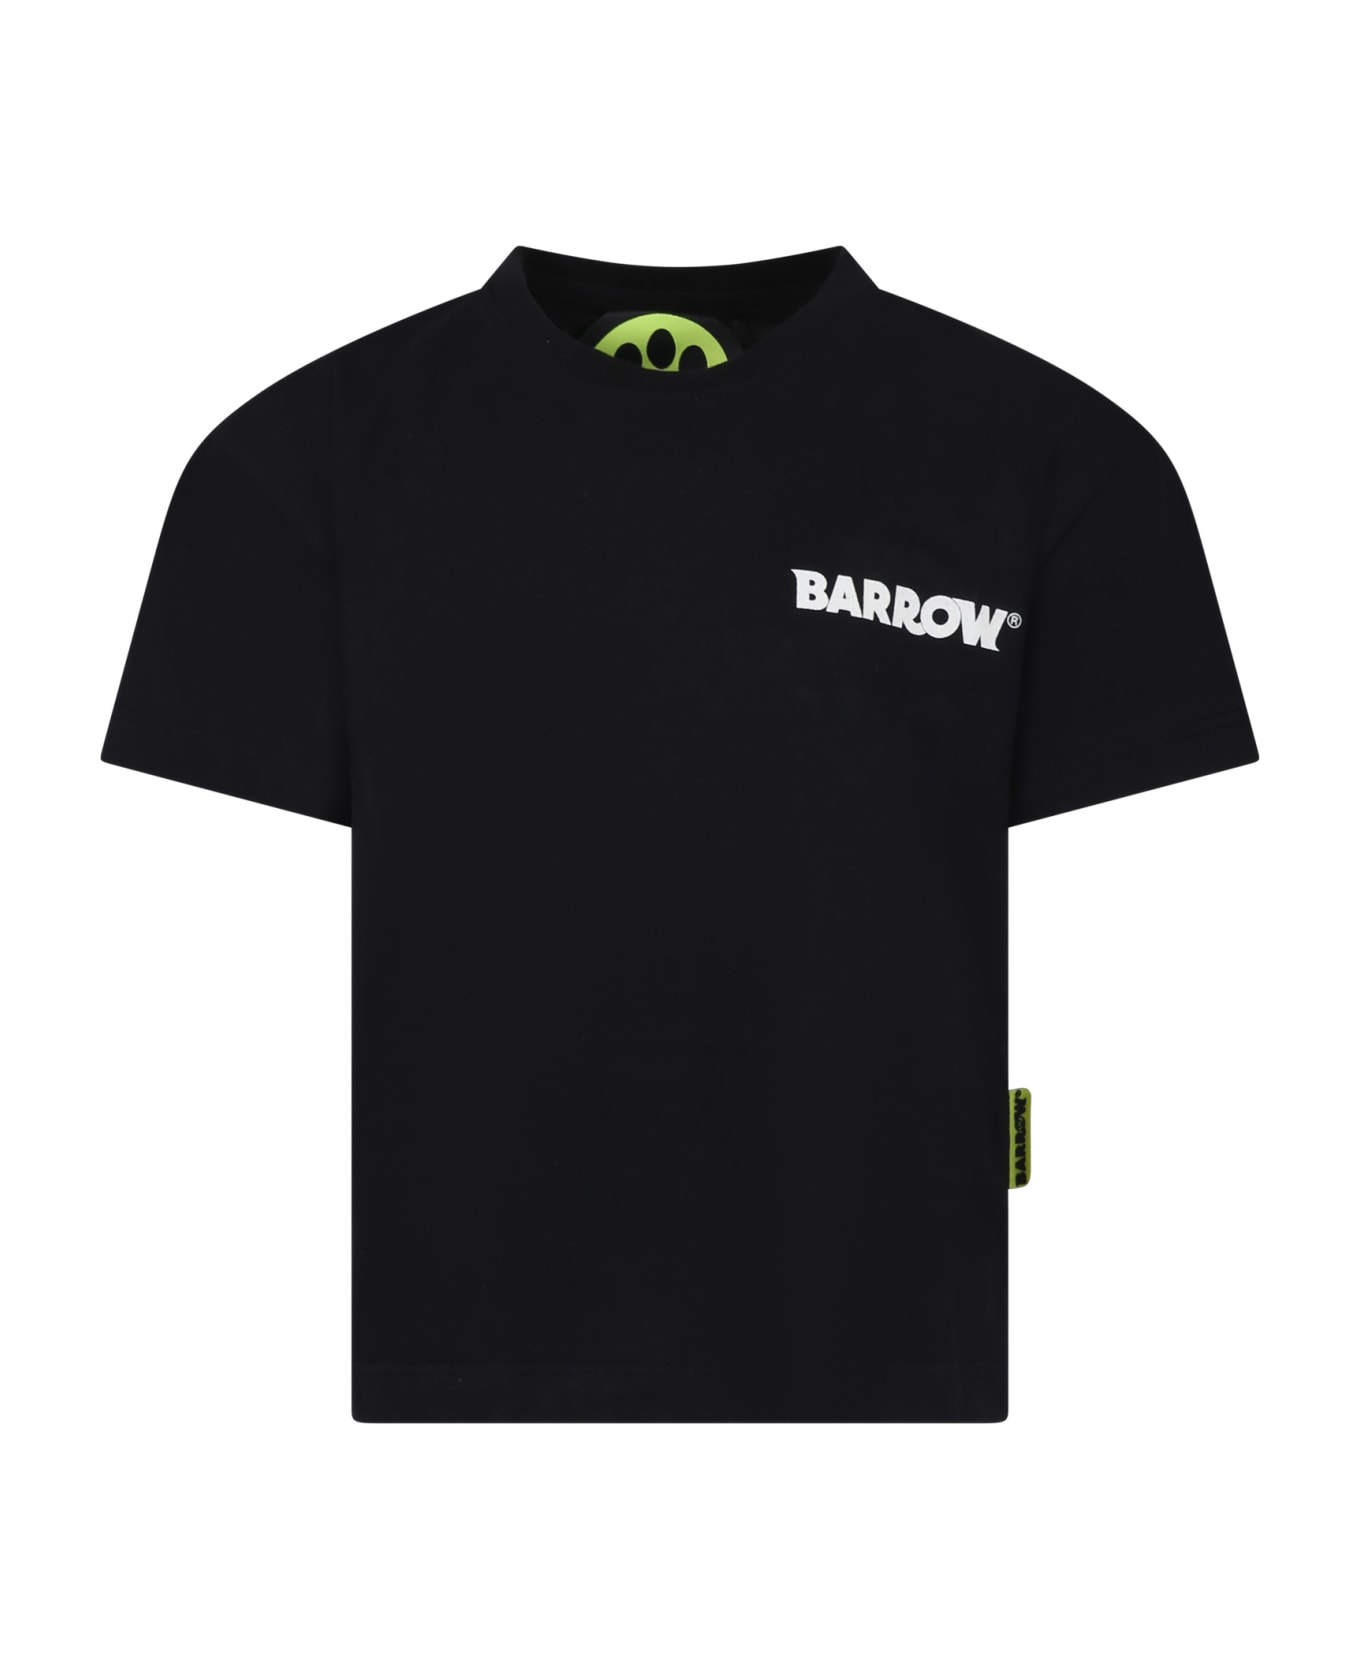 Barrow Black T-shirt For Kids With Smiley Face And Logo - Black